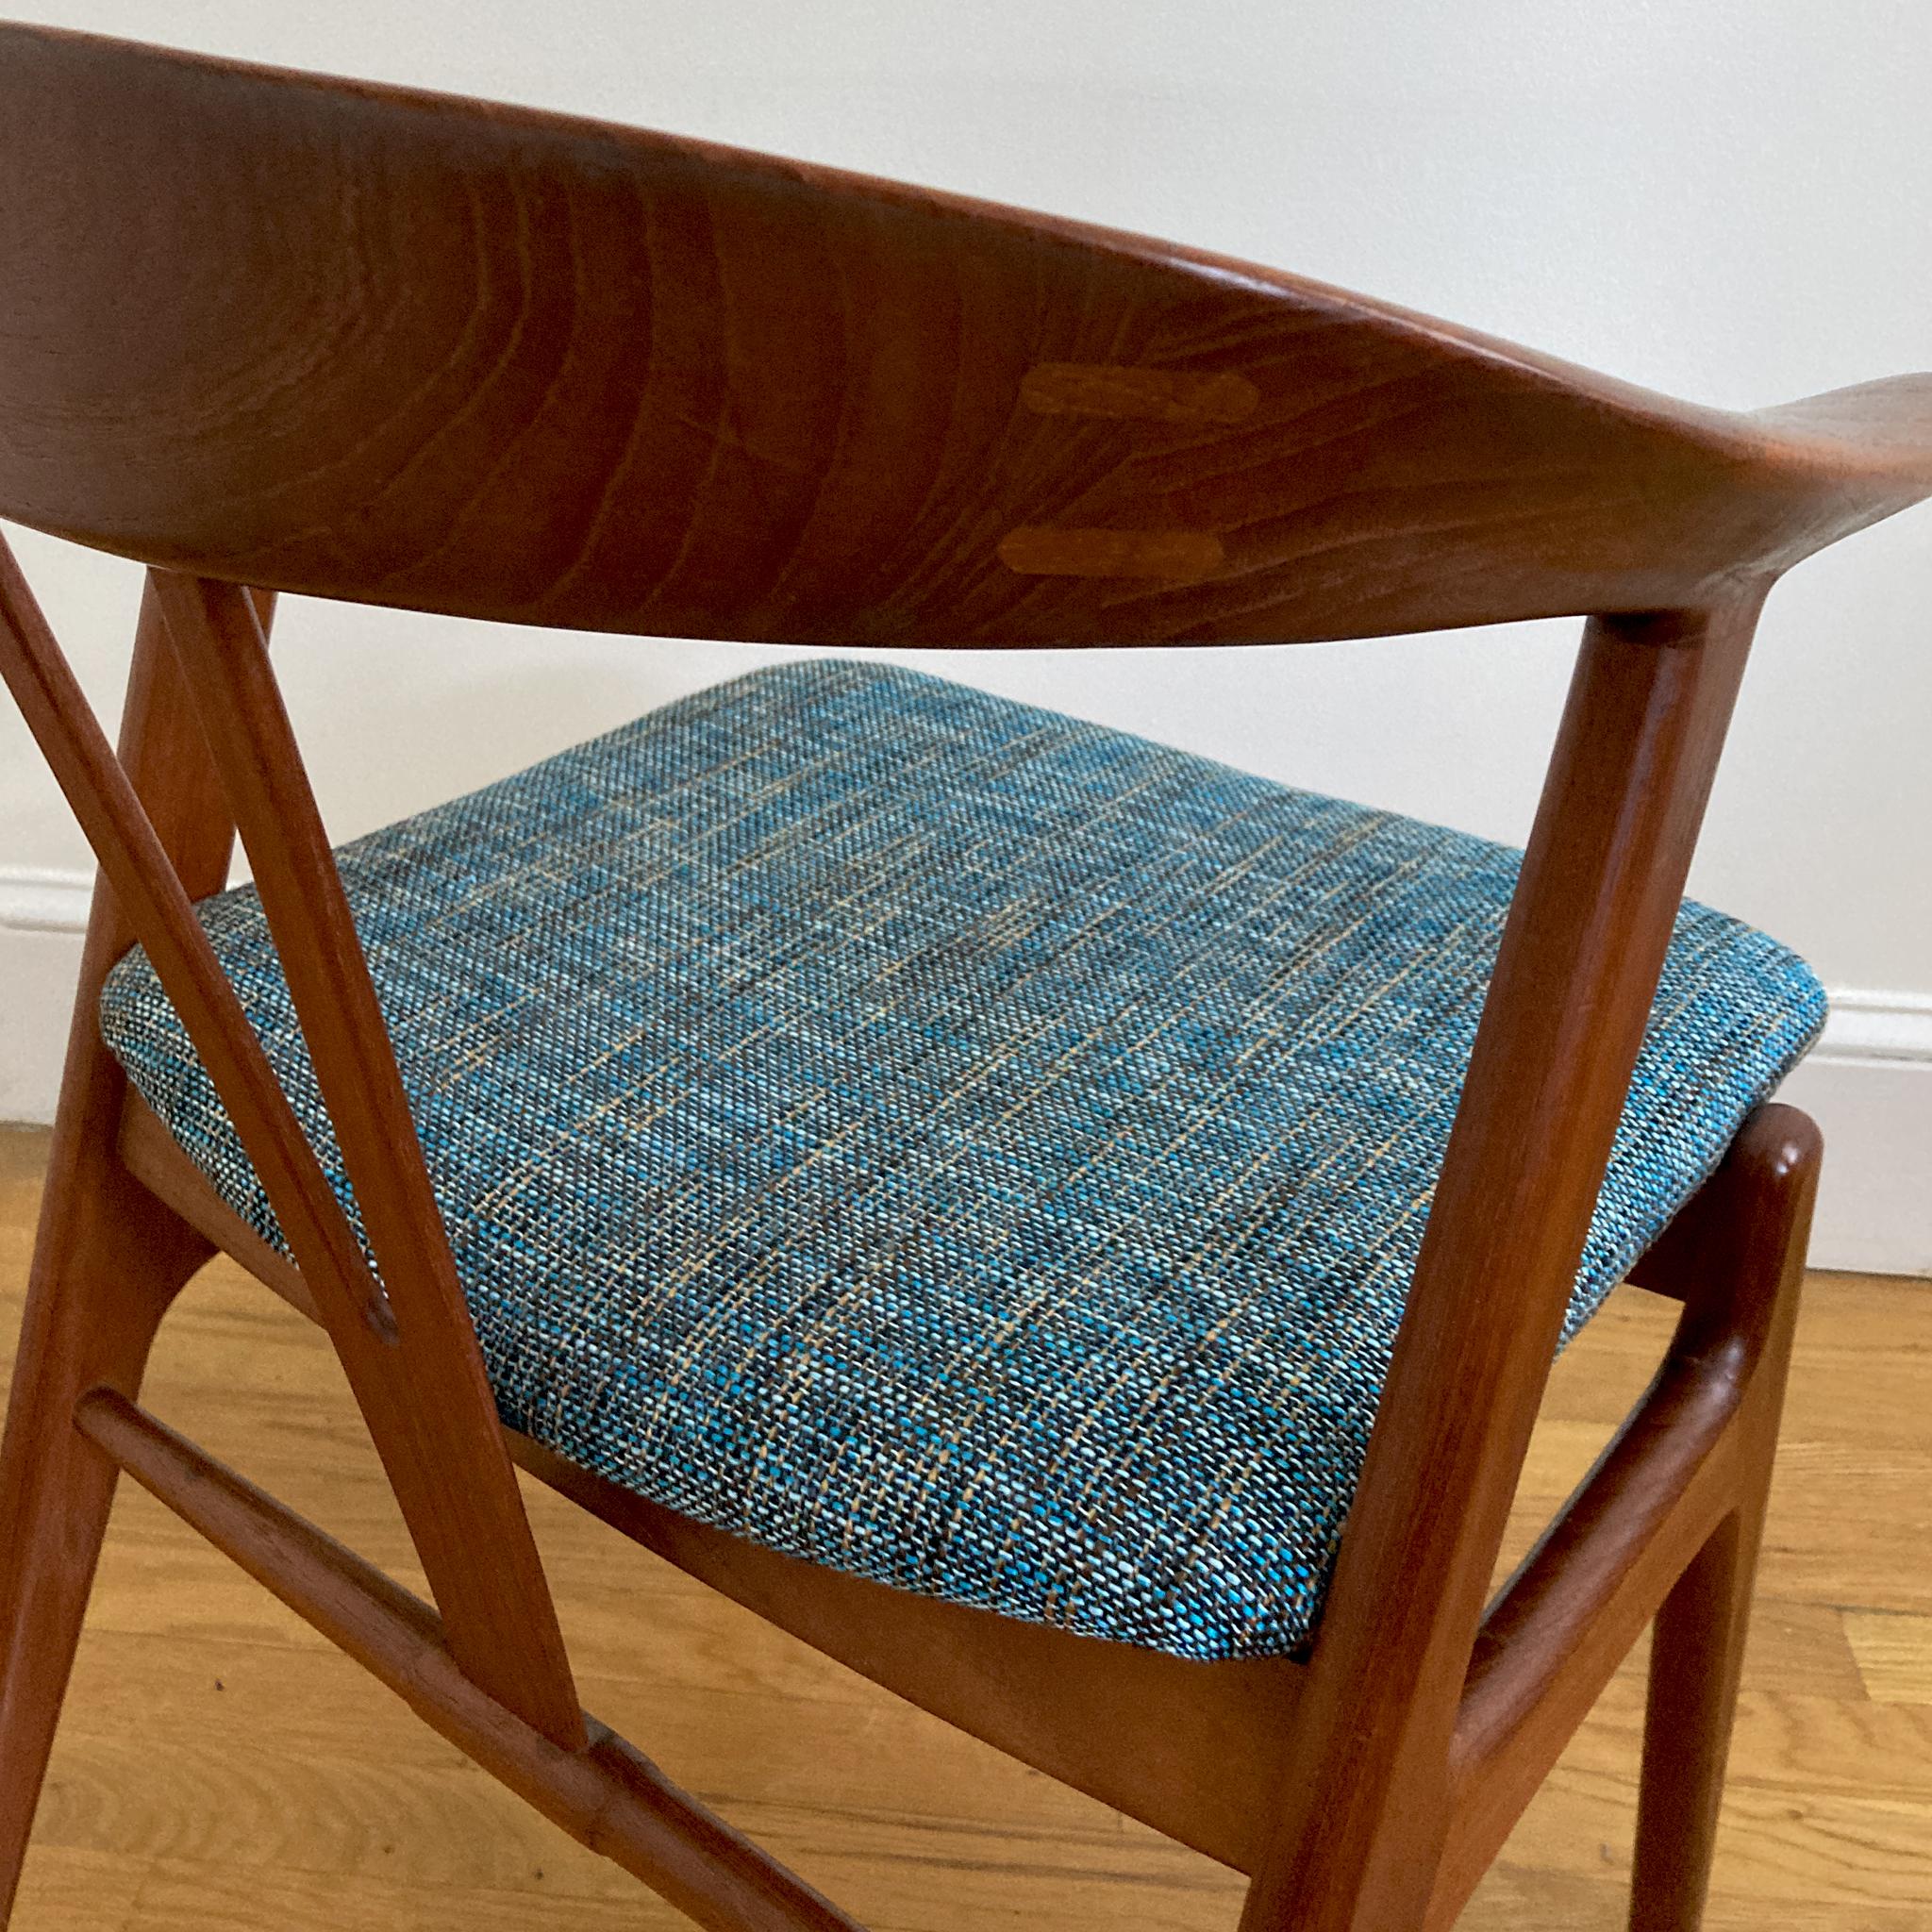 Fabric Torbjørn Afdal Teak Form Chair with Green Teal Upholstery, 1950s For Sale